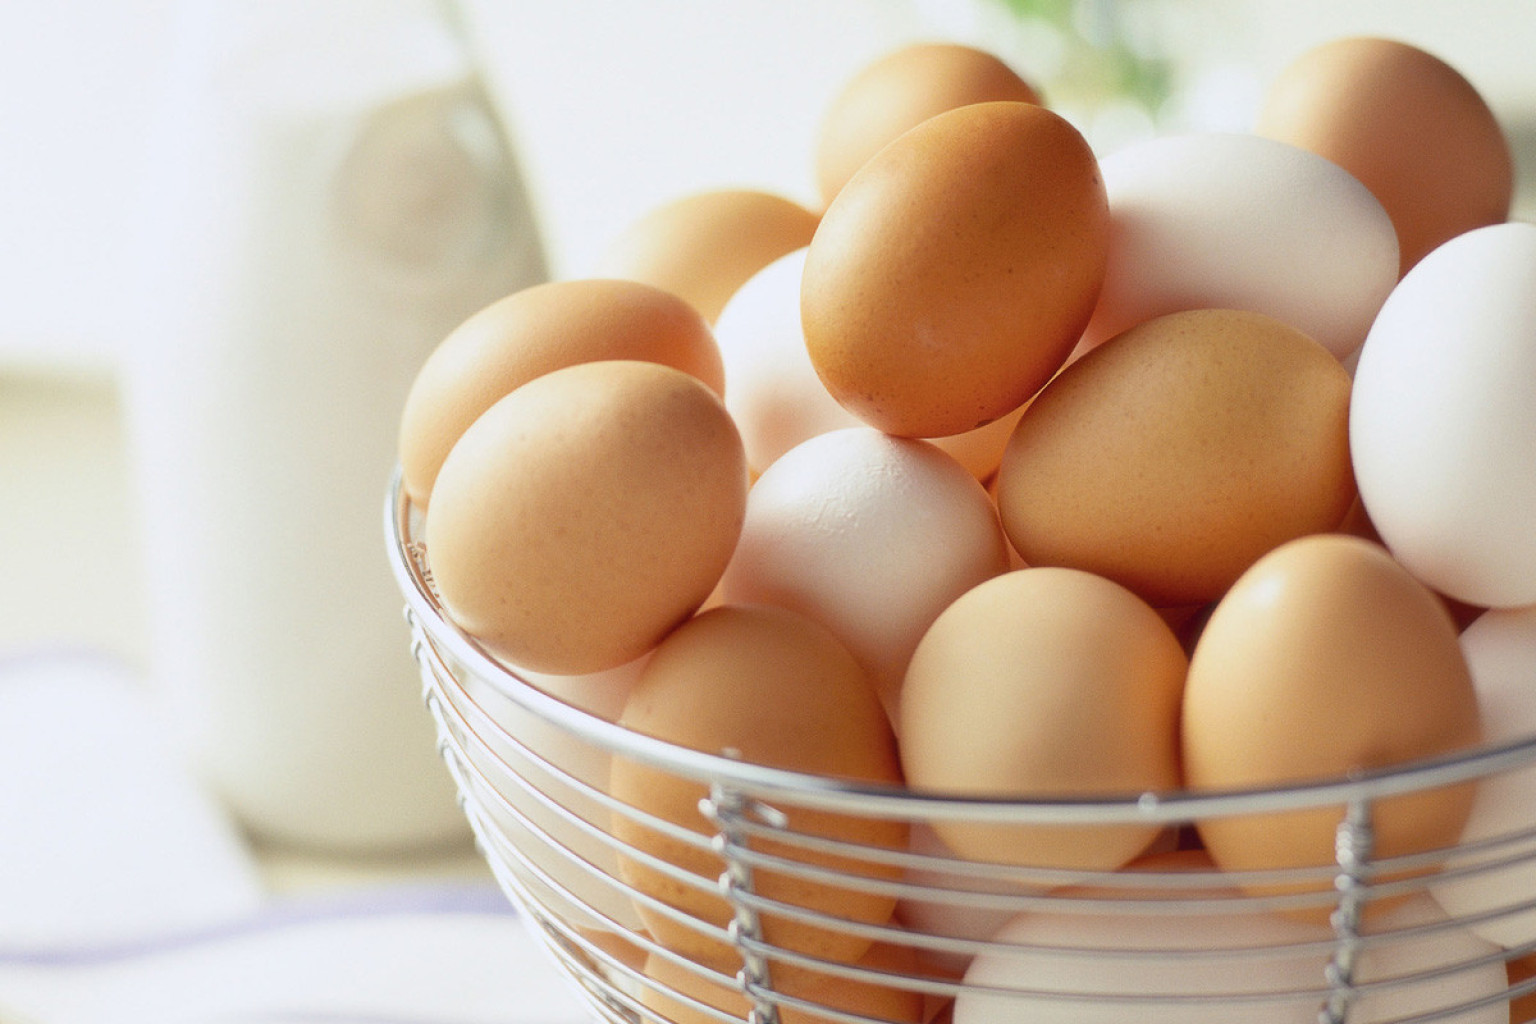 You can cook eggs whichever you want and still get the benefits you need.